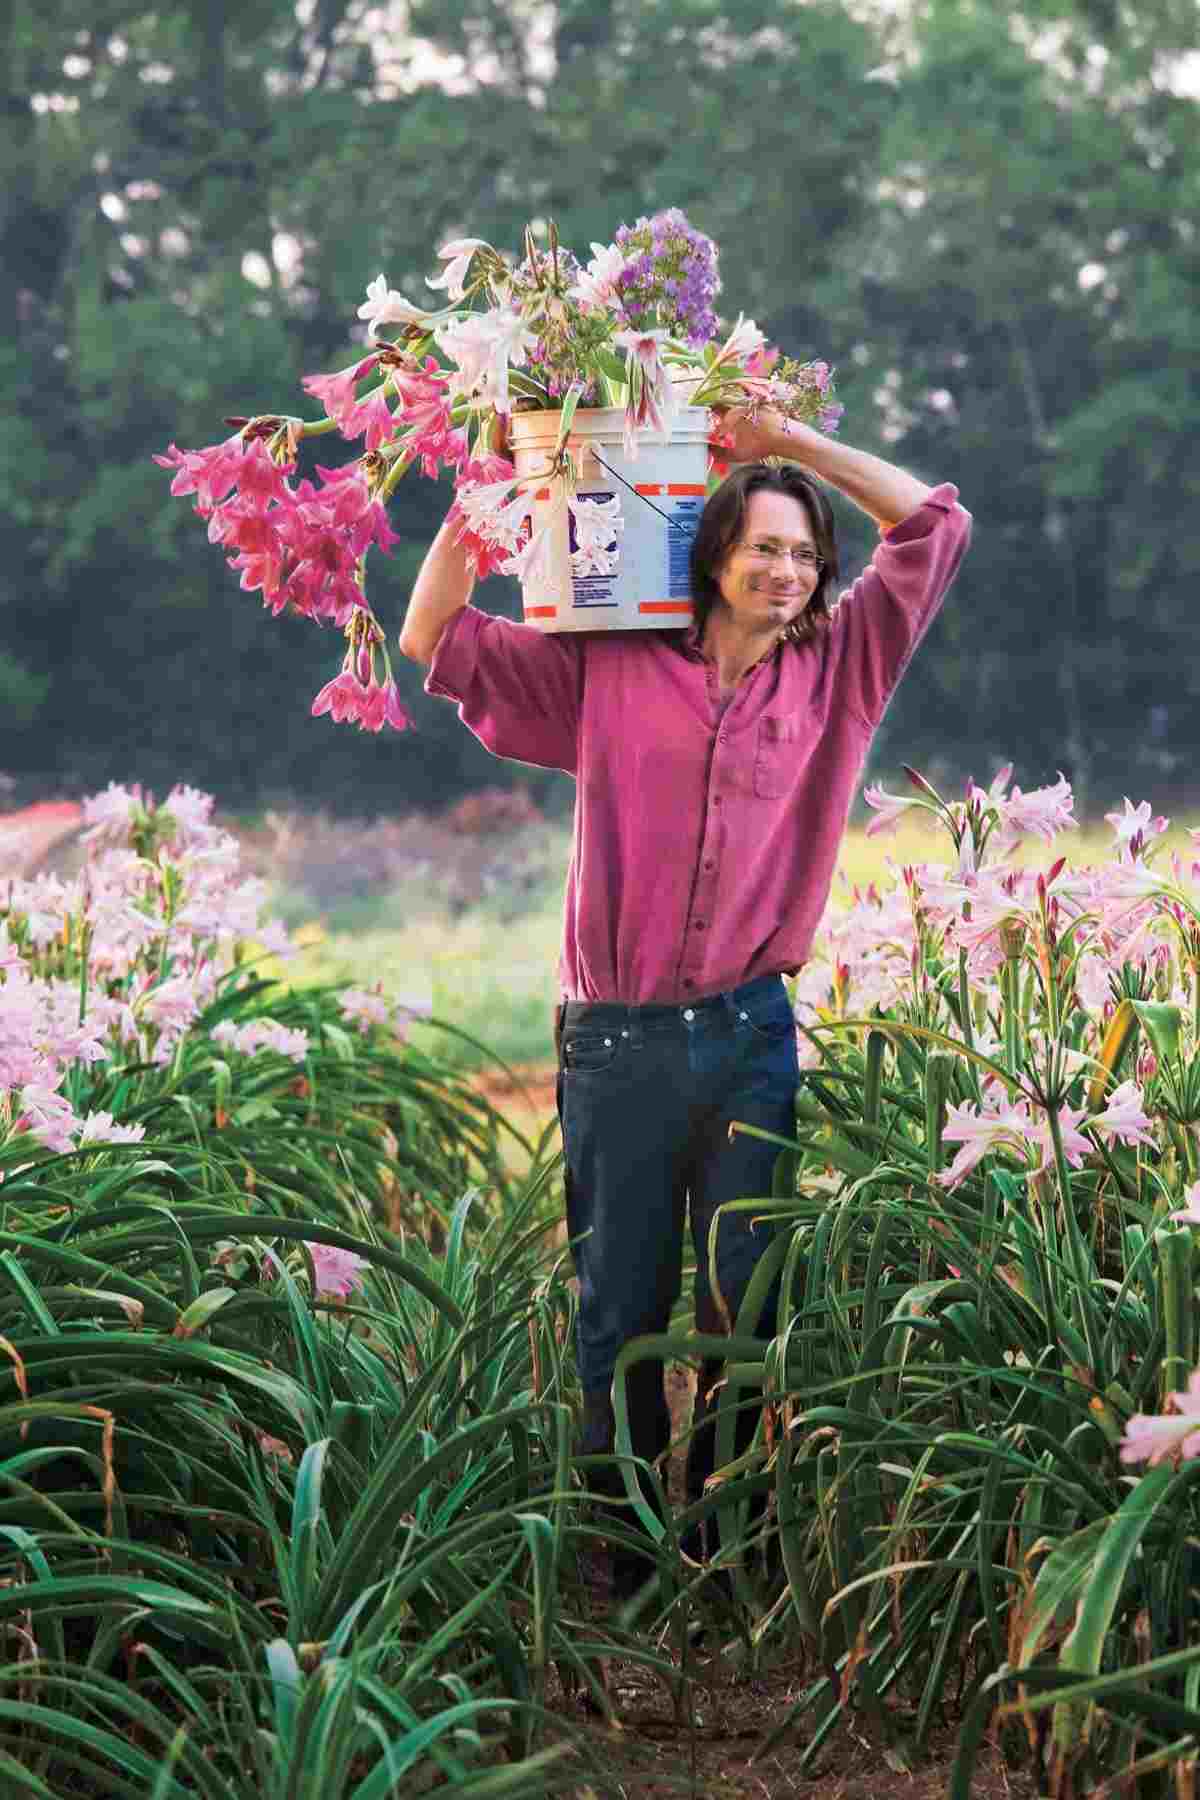 man likes to plant a bucket full of flowers to plant